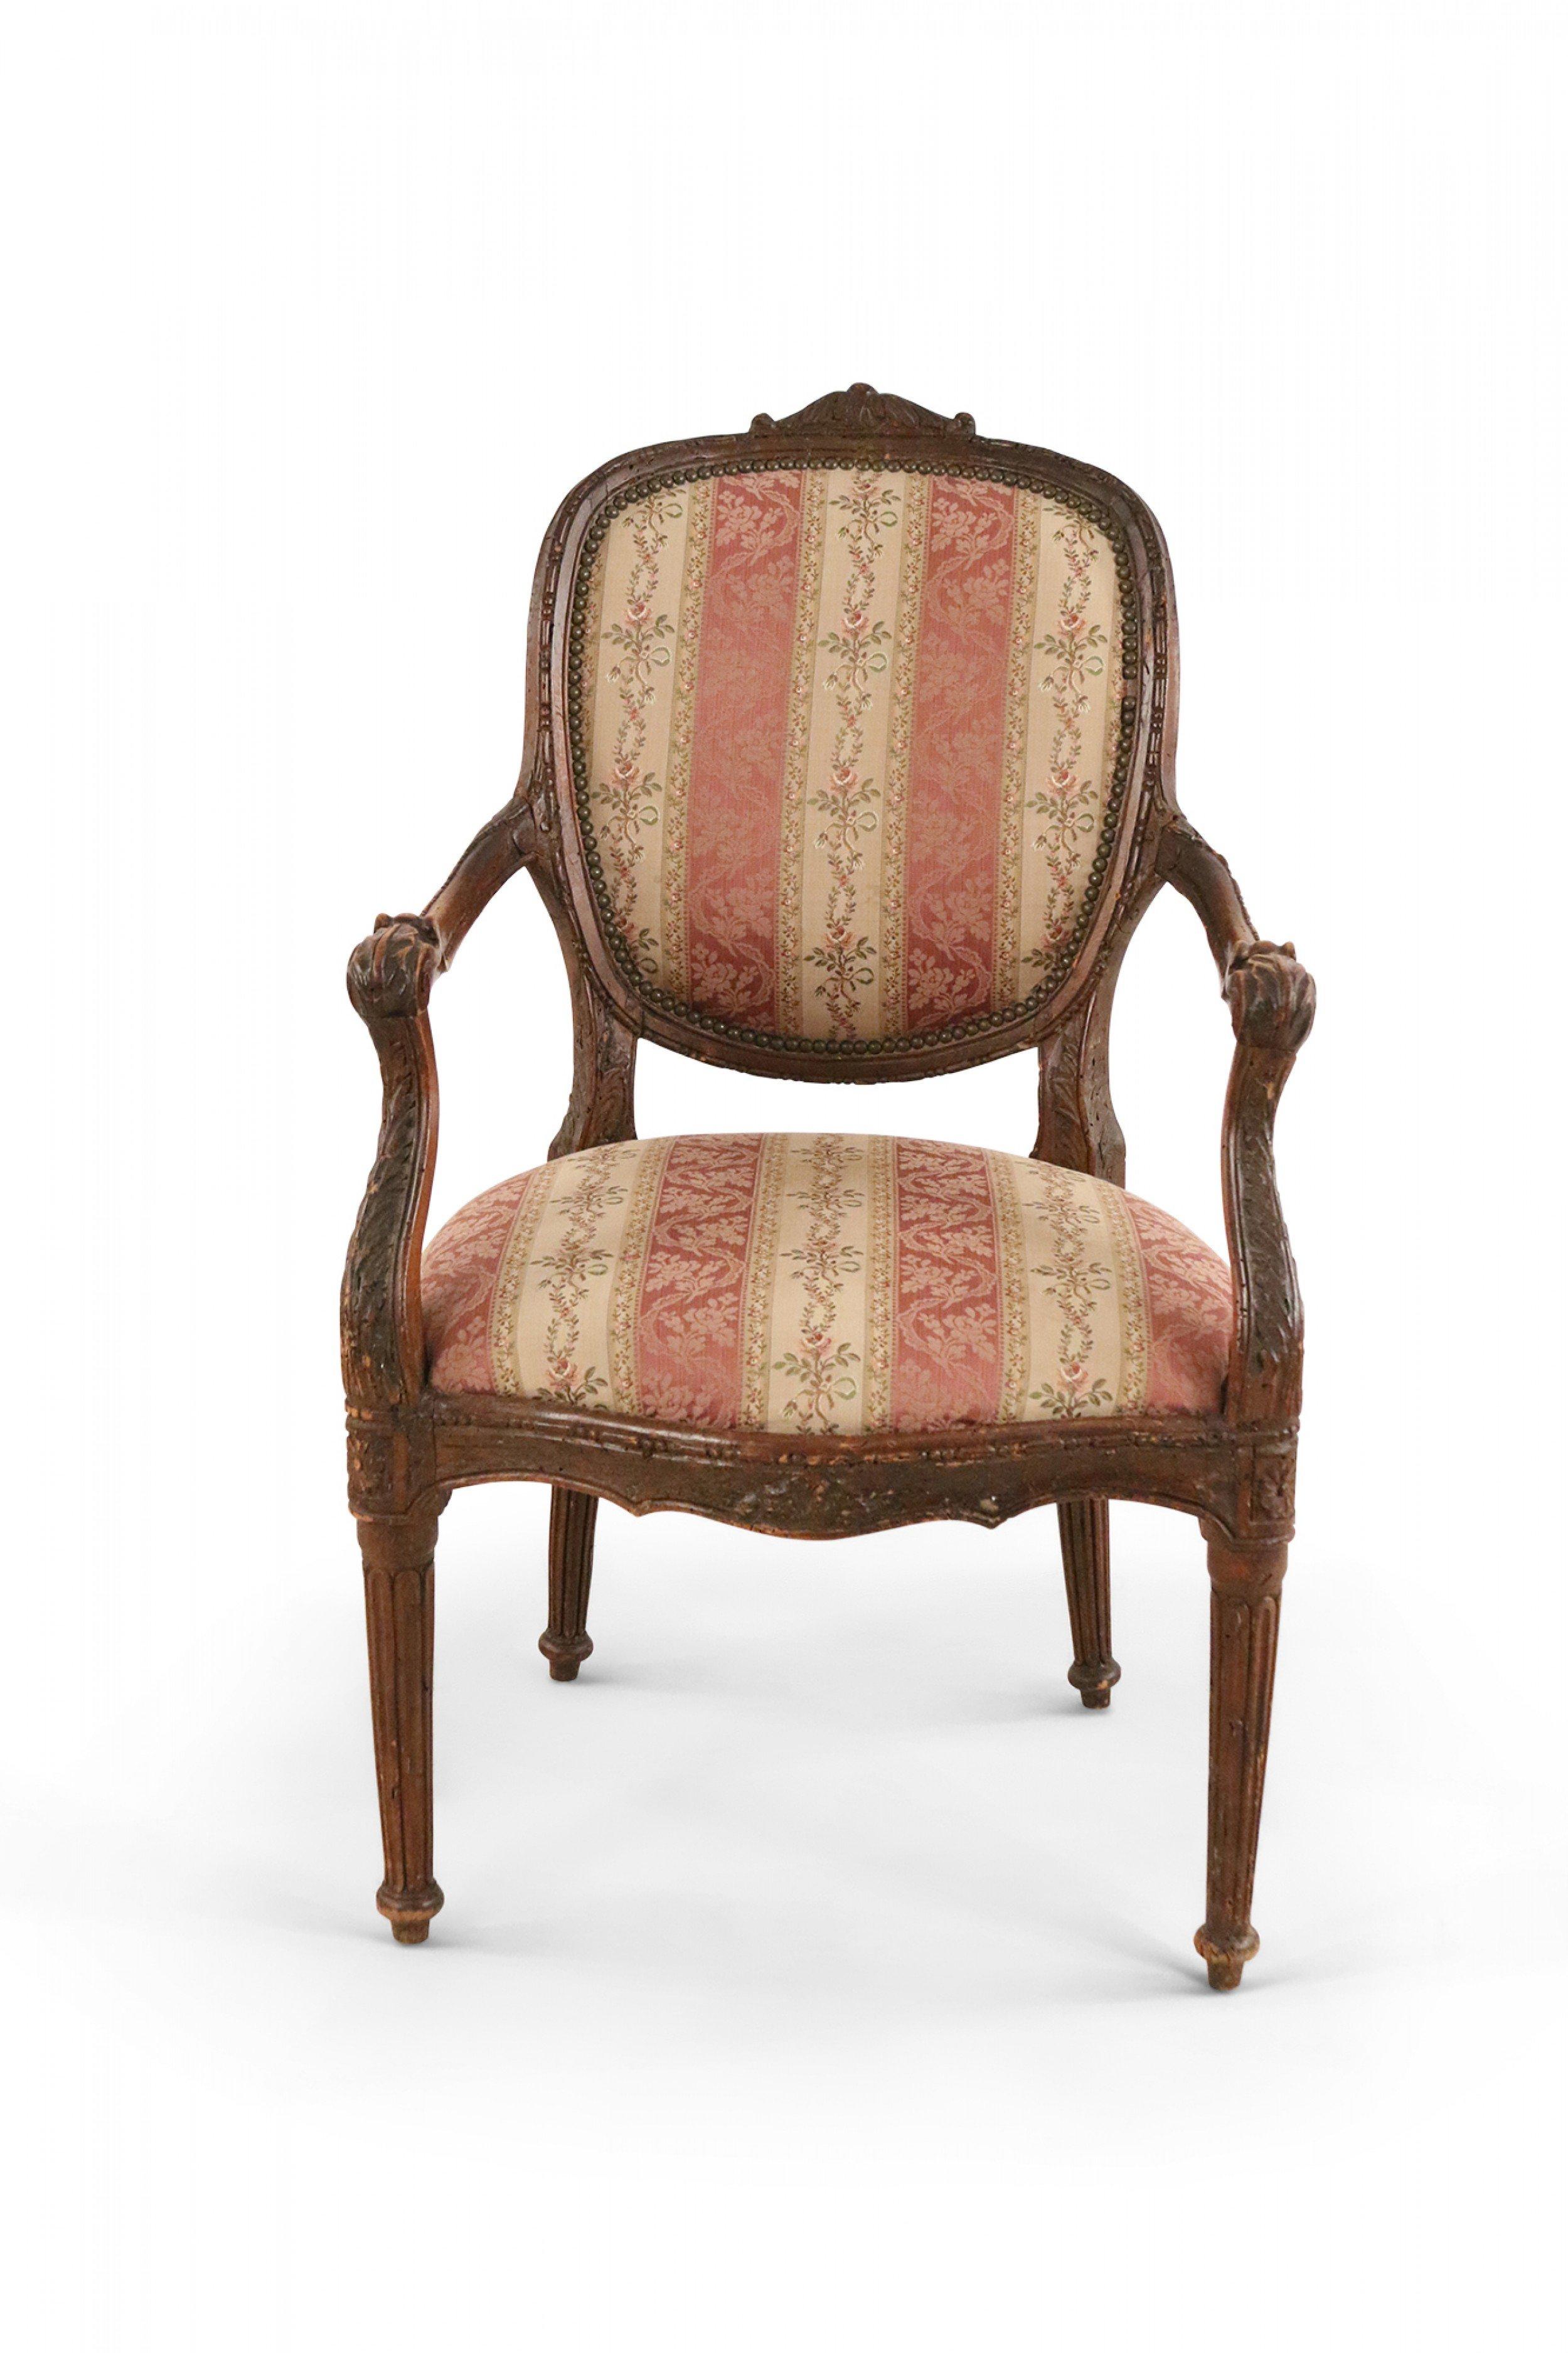 Pair of French Louis XVI walnut armchairs with beige and pink stripe upholstered oval backs and seats and carved foliate details along frame supported on fluted legs. (PRICED AS PAIR).
 